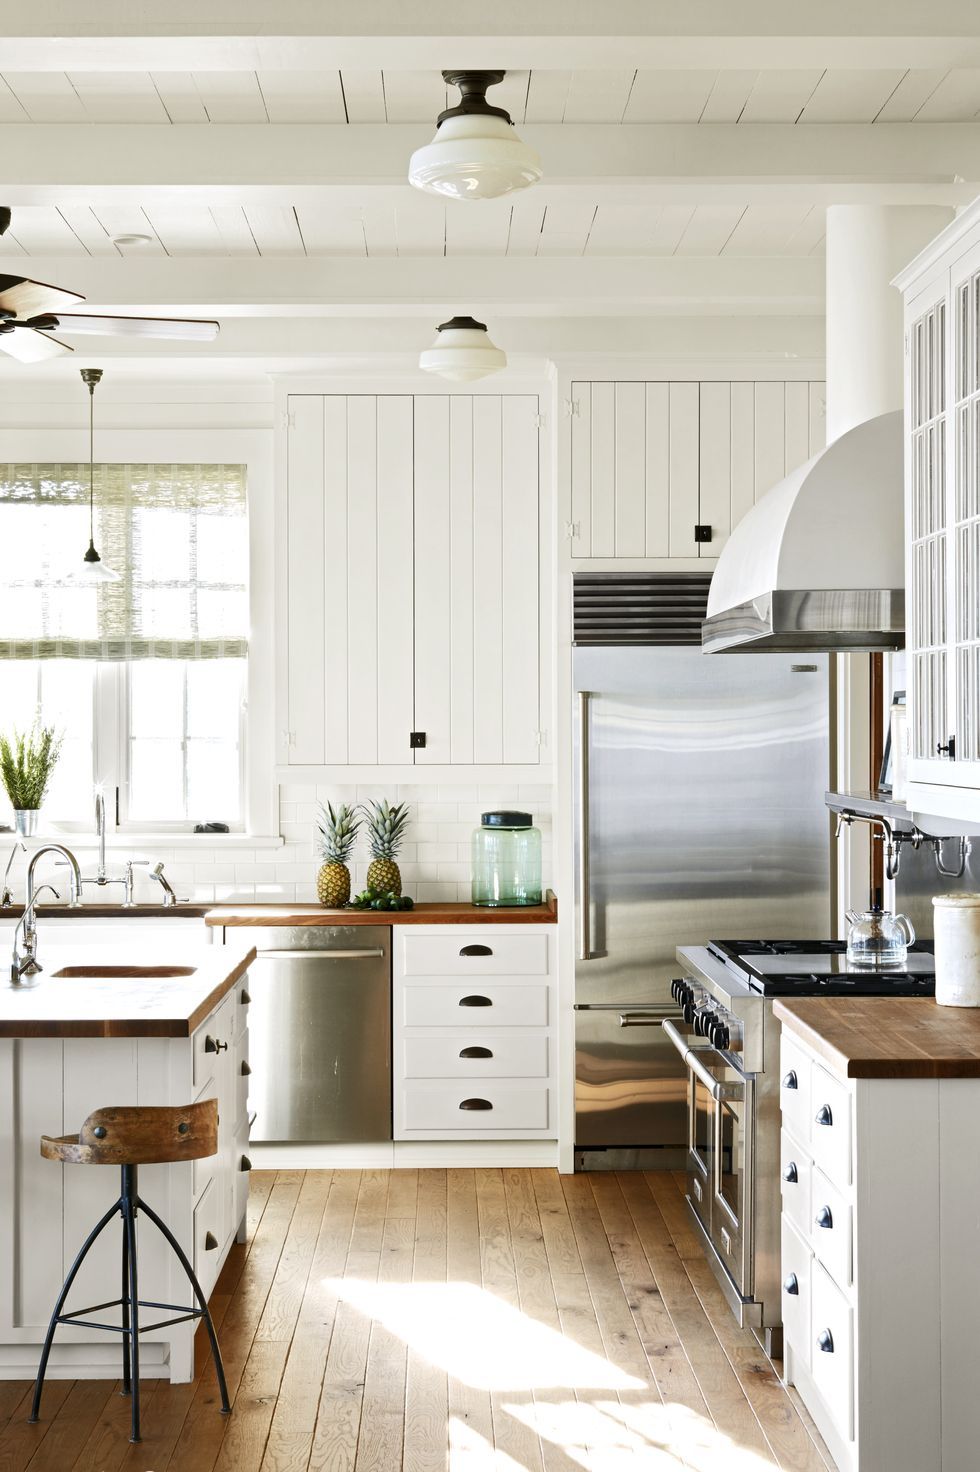 The Pros and Cons of Butcher-Block Countertops